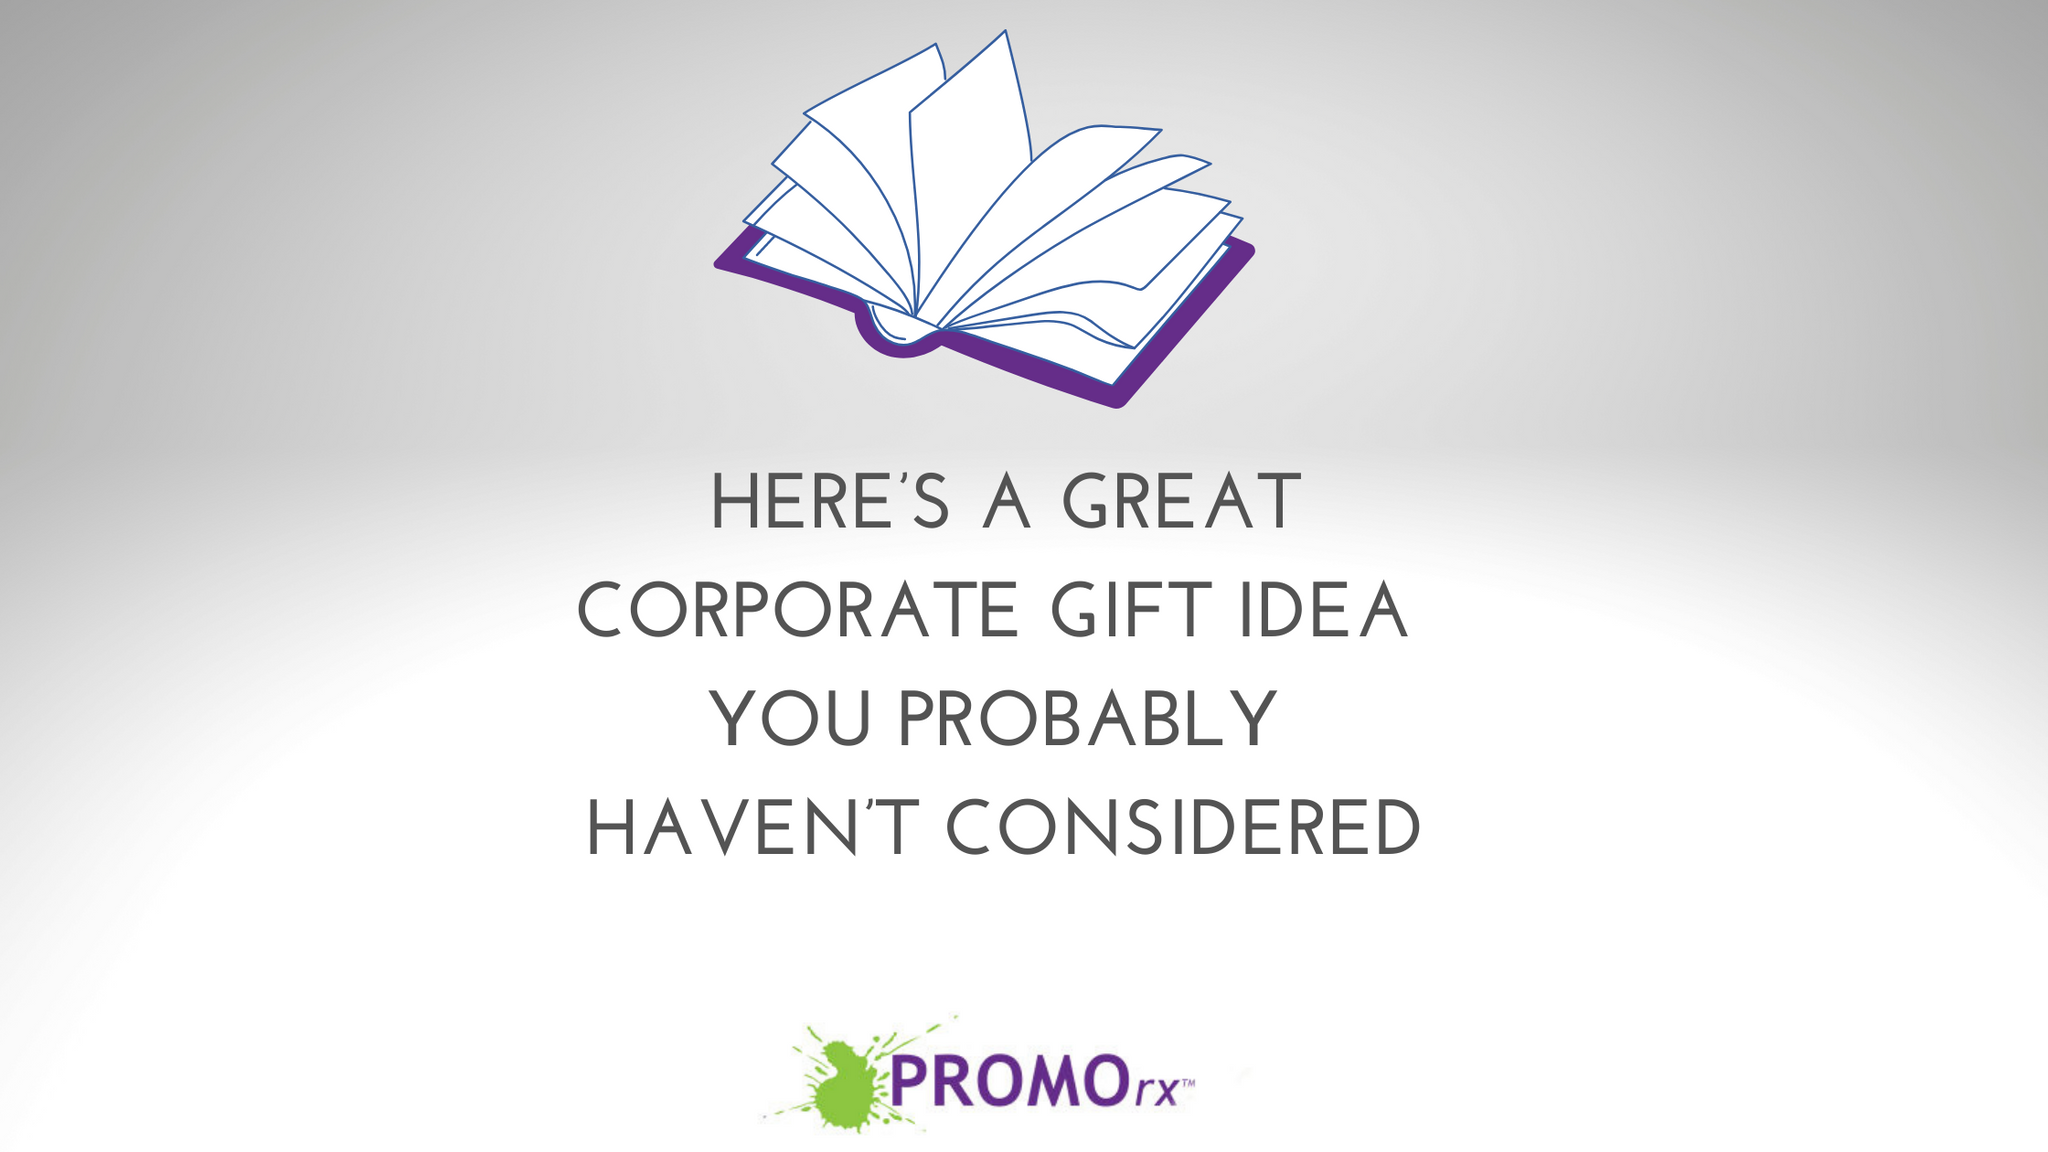 Here’s a Corporate Gift Idea You Probably Haven’t Considered